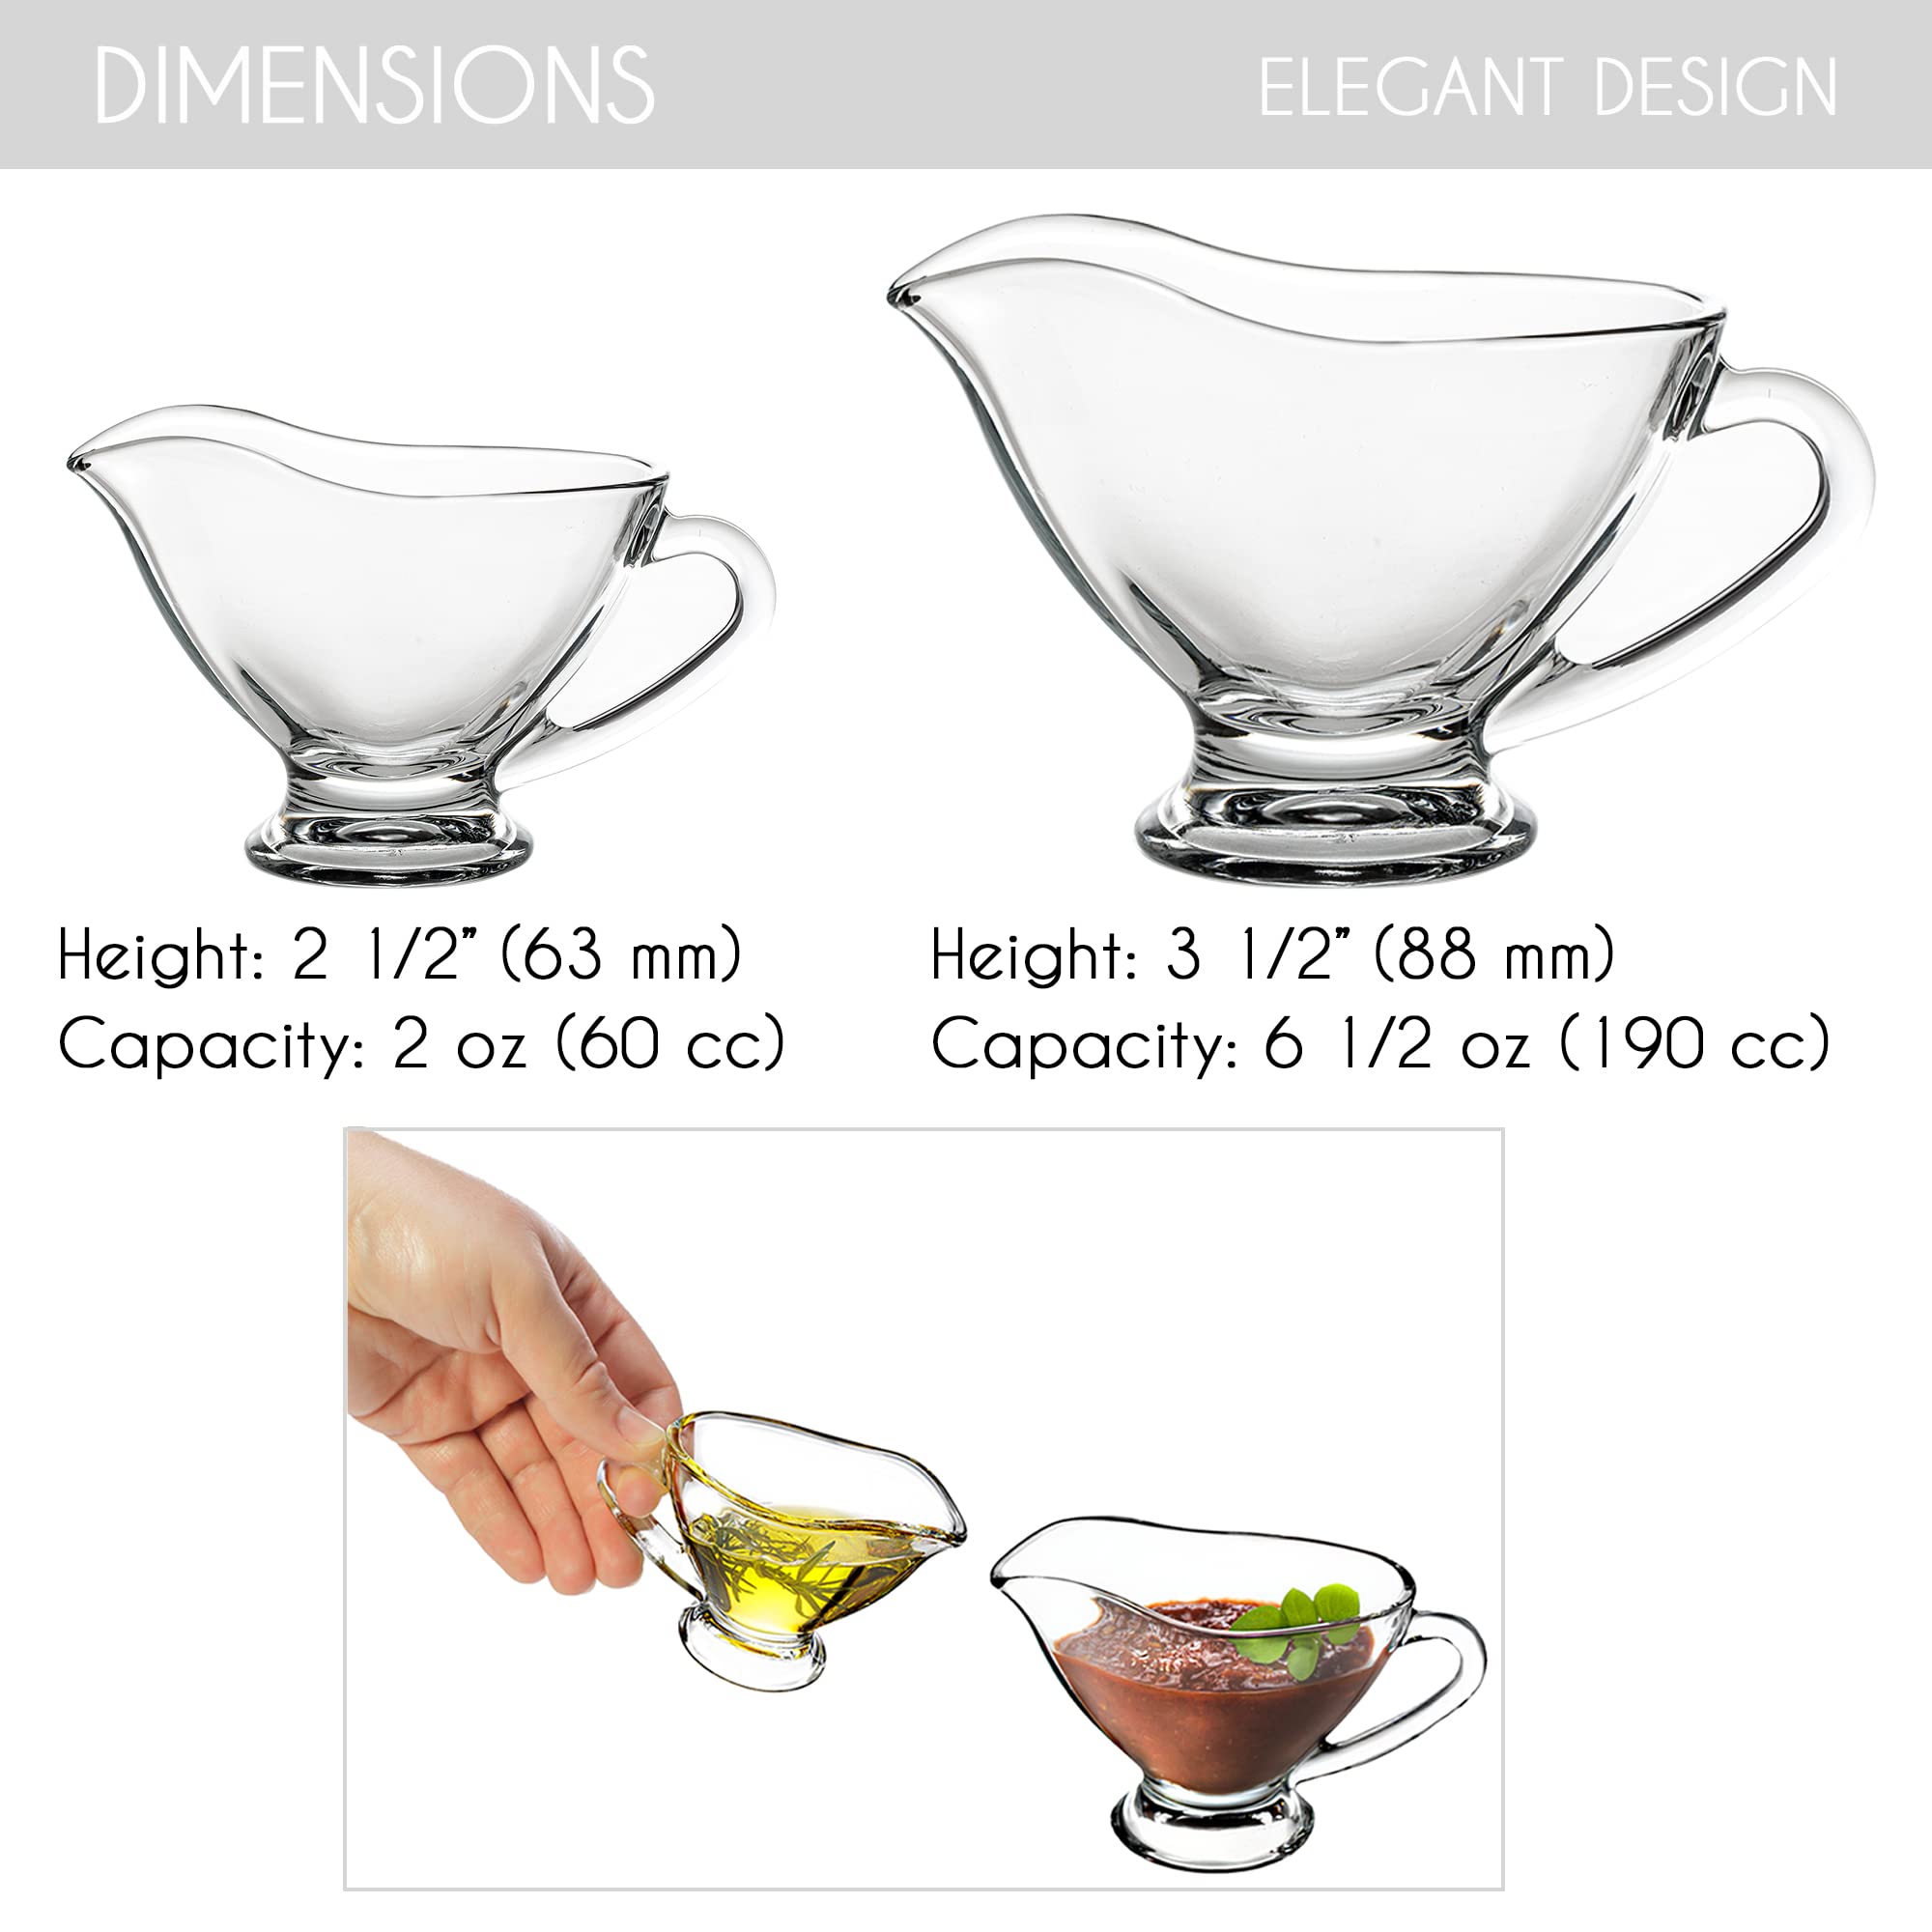 Crystalia Gravy Boat Saucer Set Clear Glass, Large and Small Condiment Appetizer Serving Bowl with Easy Grip Handle, Lead-Free Premium Clear Glass Set of 2